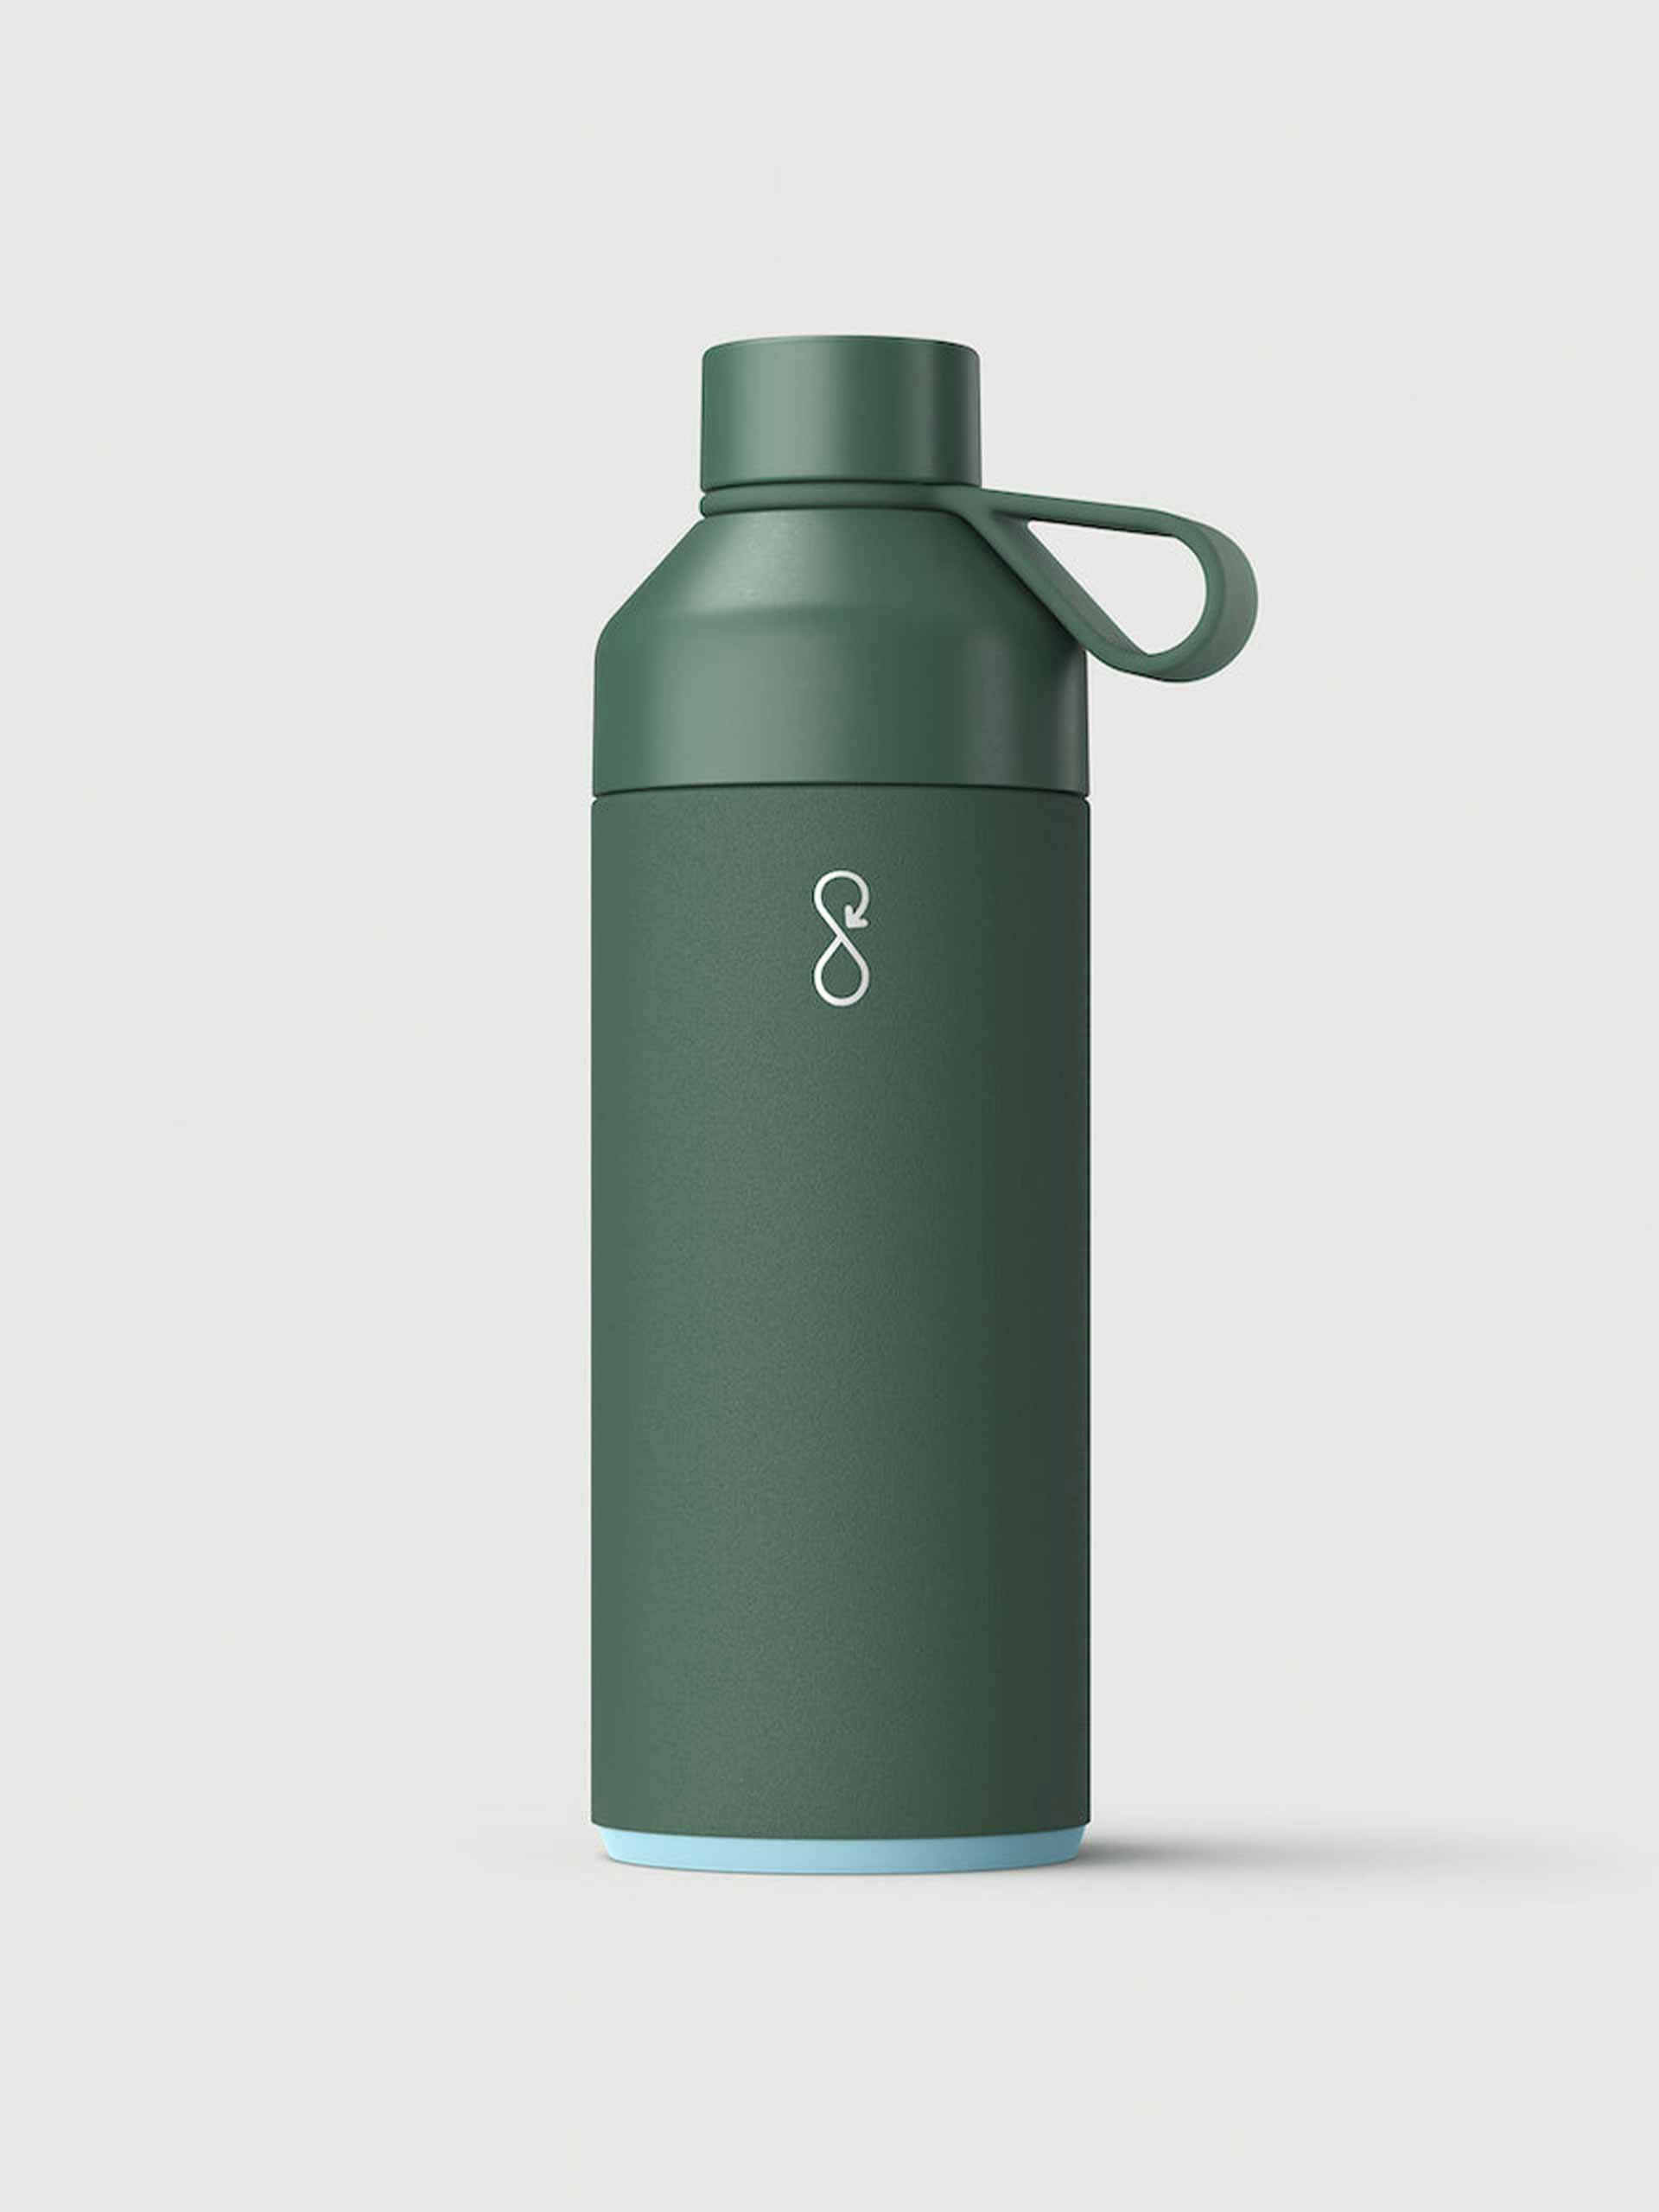 Insulated bottle in Forest Green